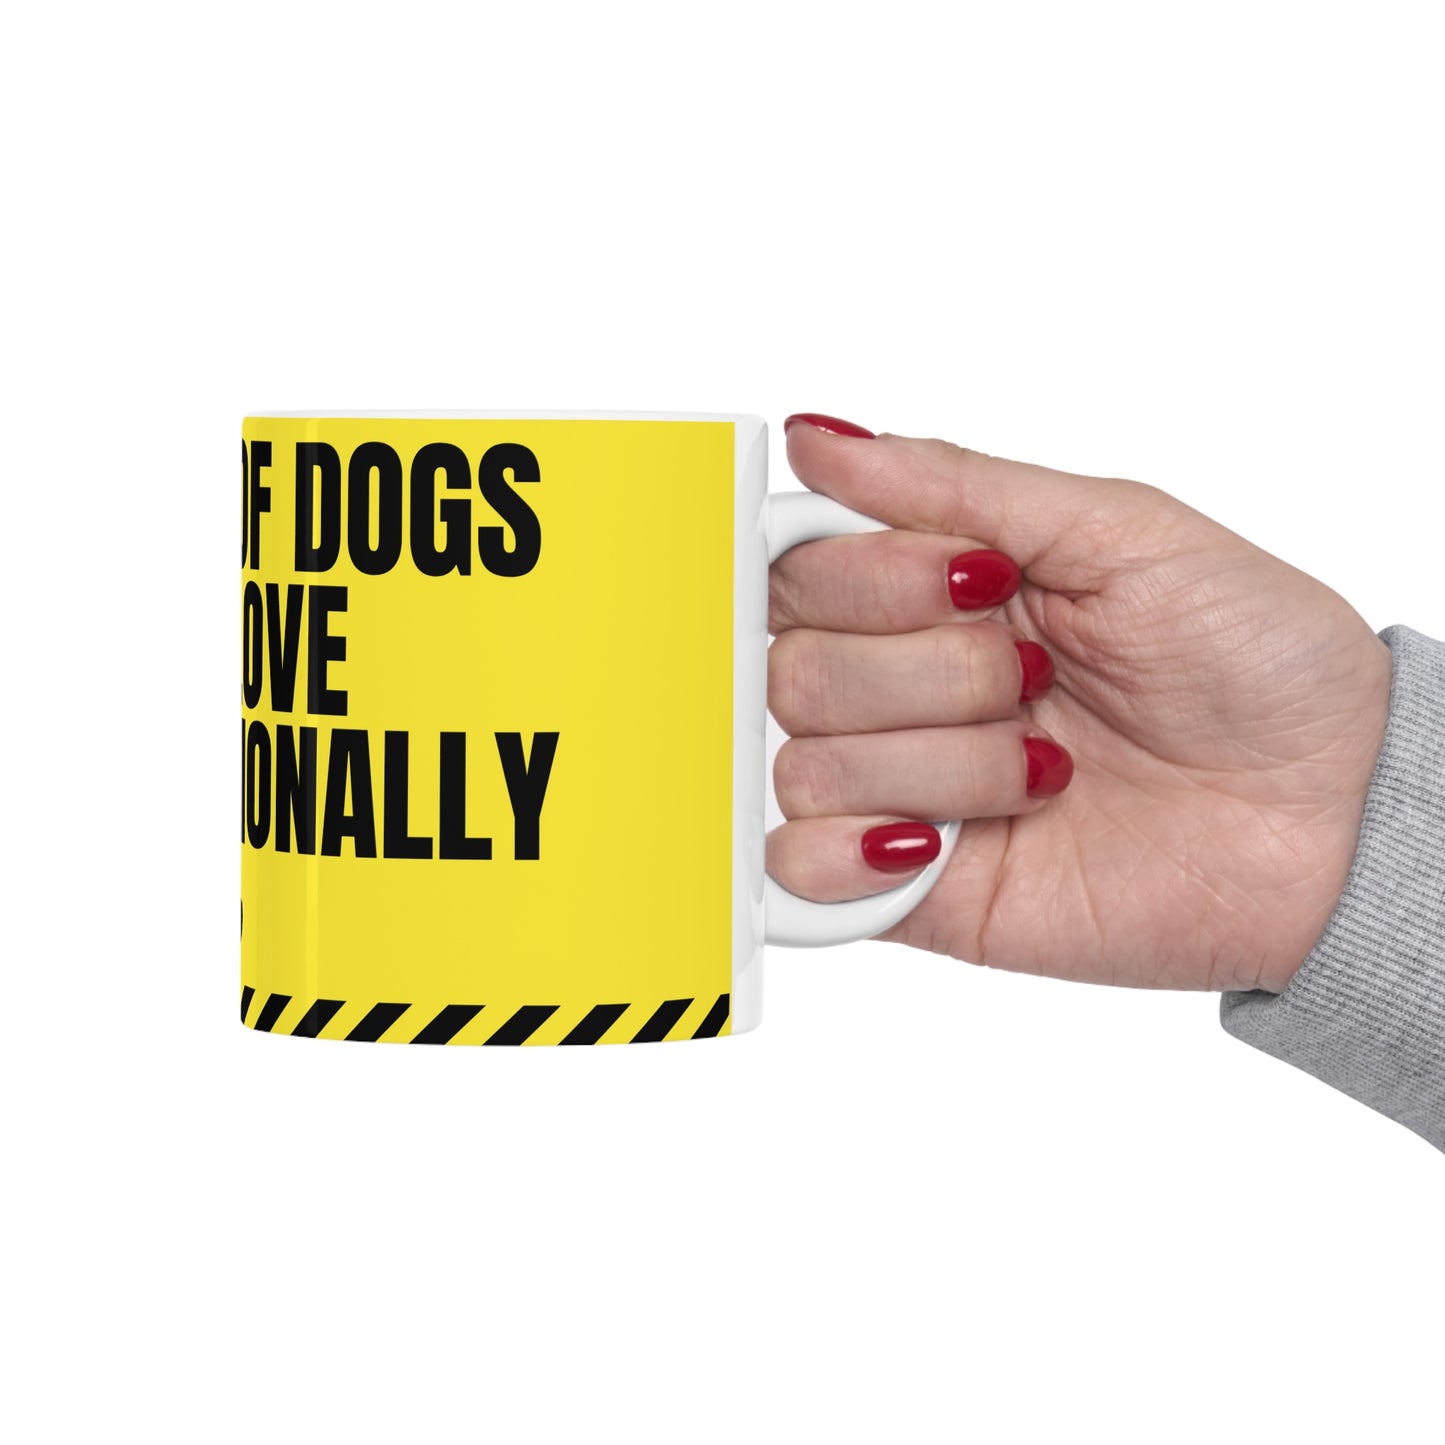 BEWARE OF DOGS THEY LOVE UNCONDITIONALLY coffee mug. They enrich our lives in so many ways! Perfect for dog lovers.